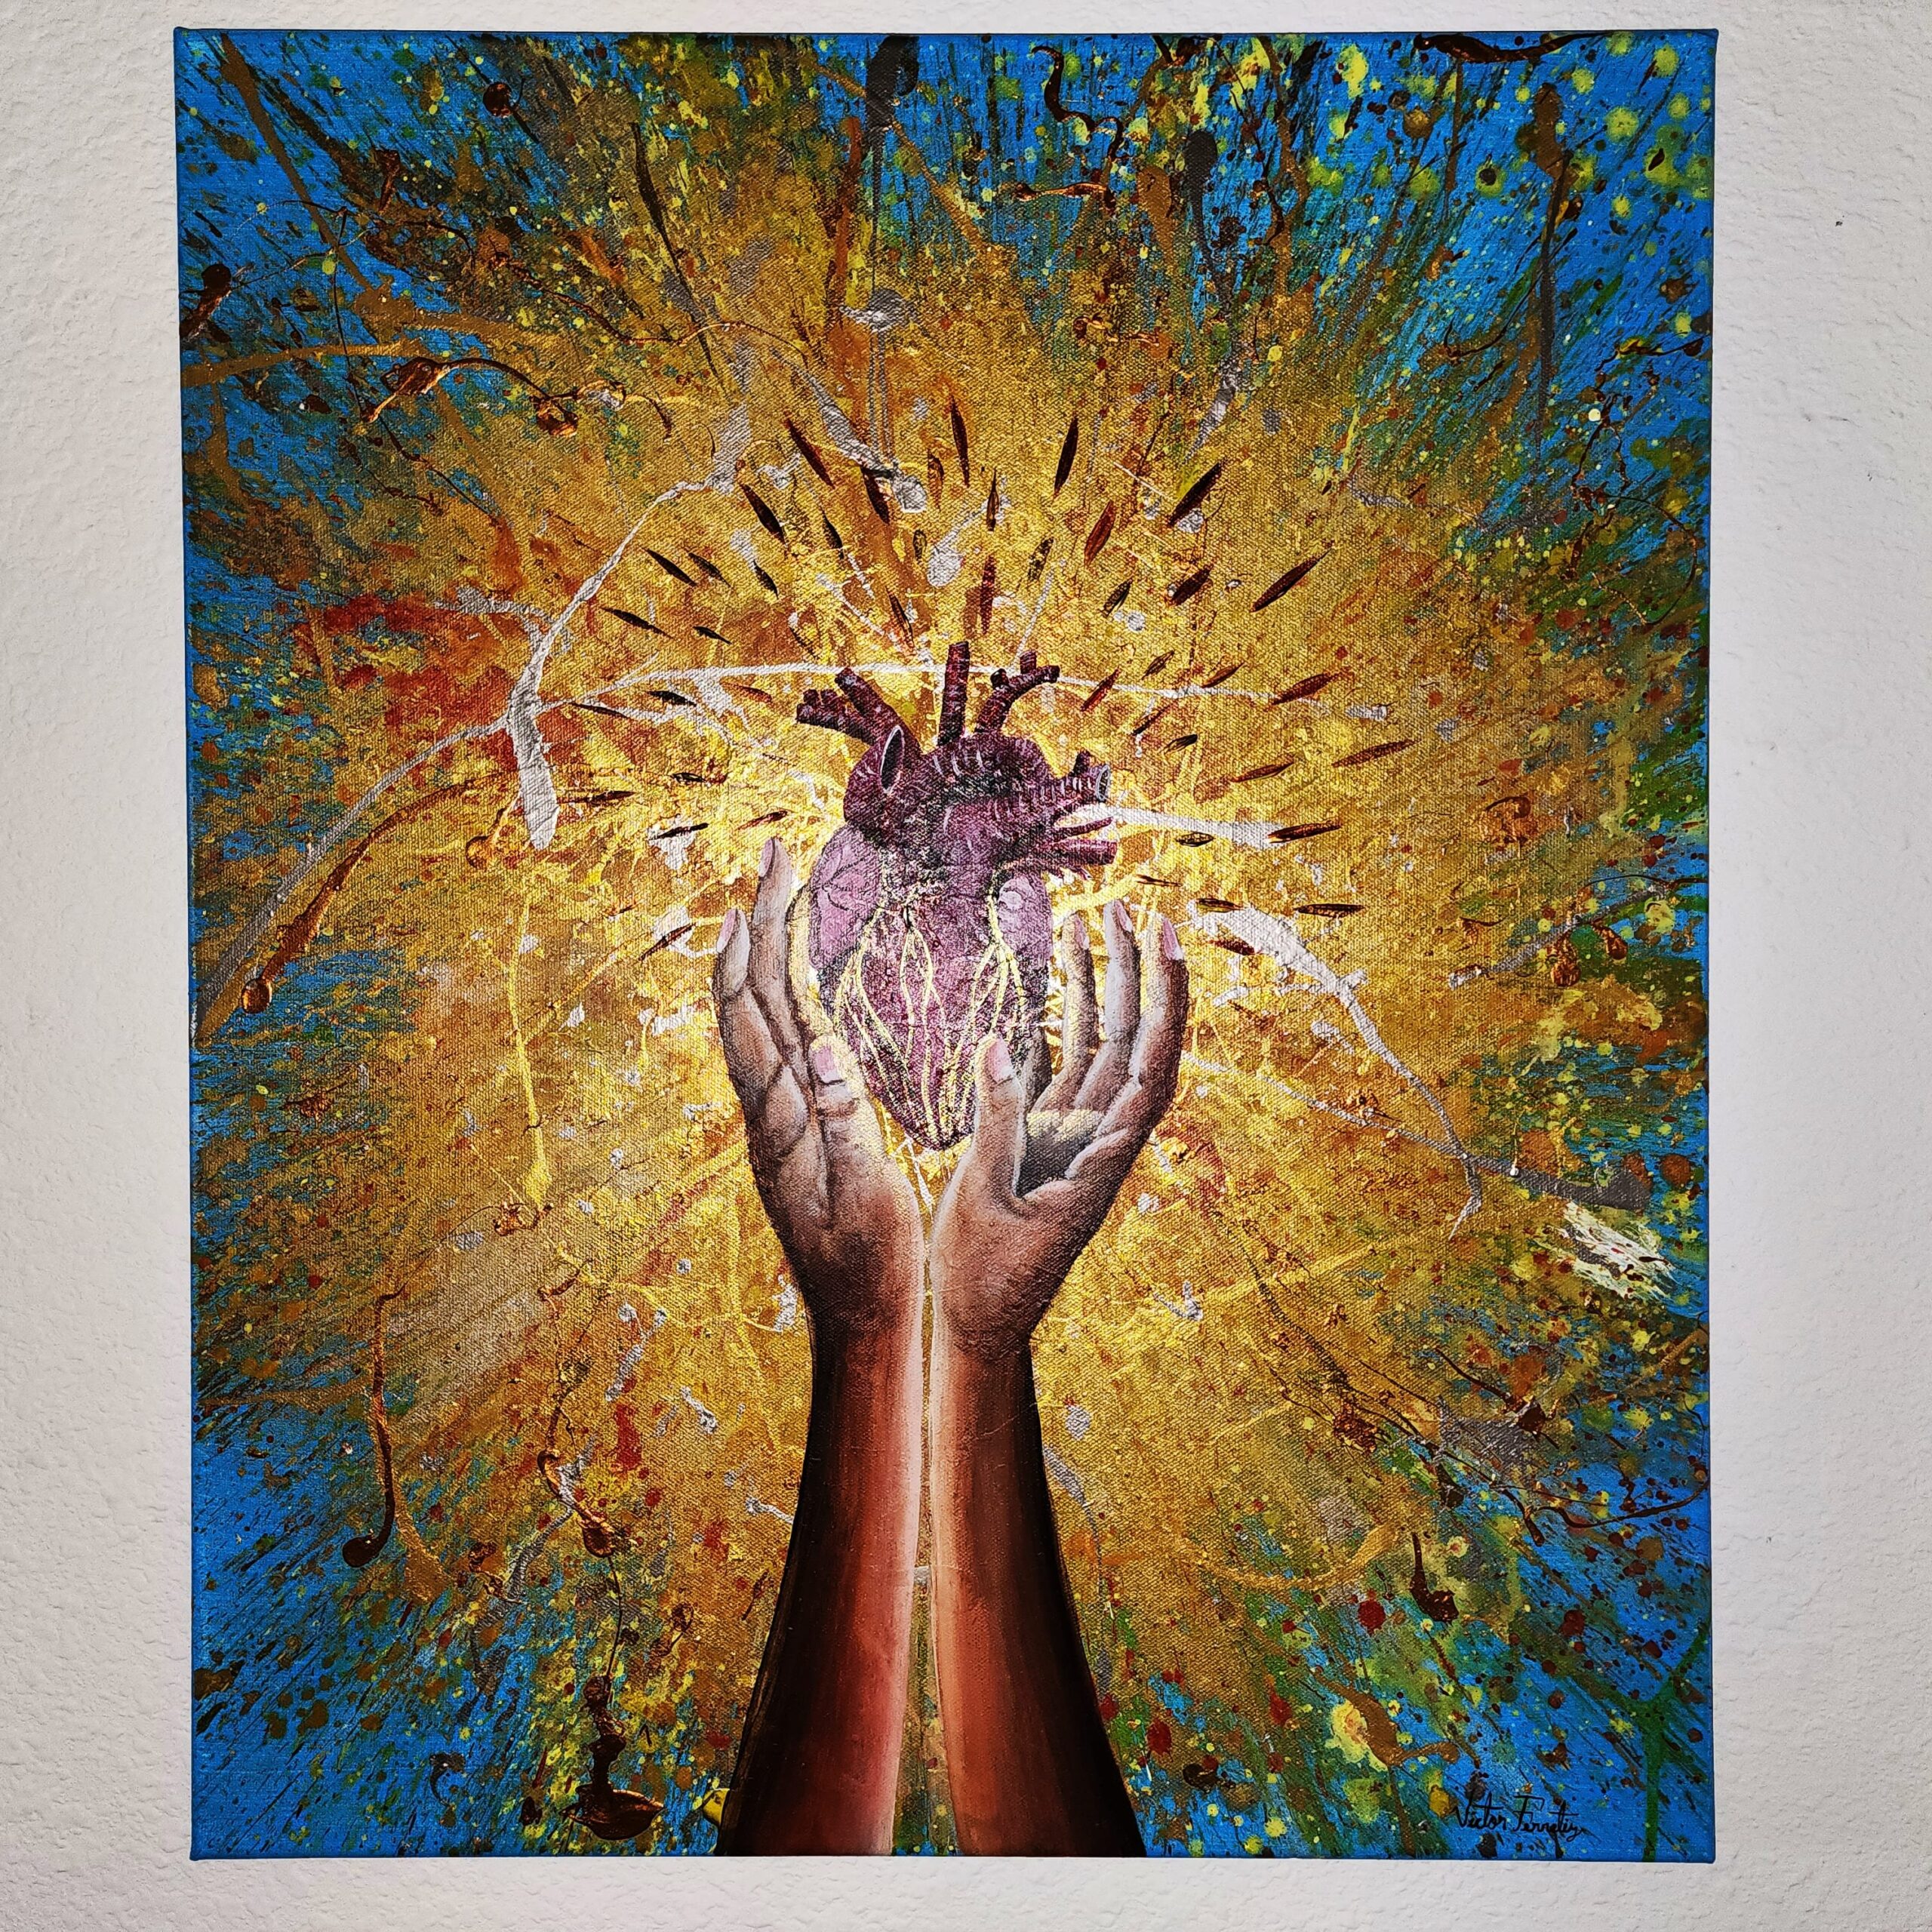 Original work of art of an explosive, passionate heart that reflects love, anguis, and deception. At the same time, this painting brings power and resistance to those who see it and to those who identify themselves to powerful feelings that make us feel with mixed emotions.